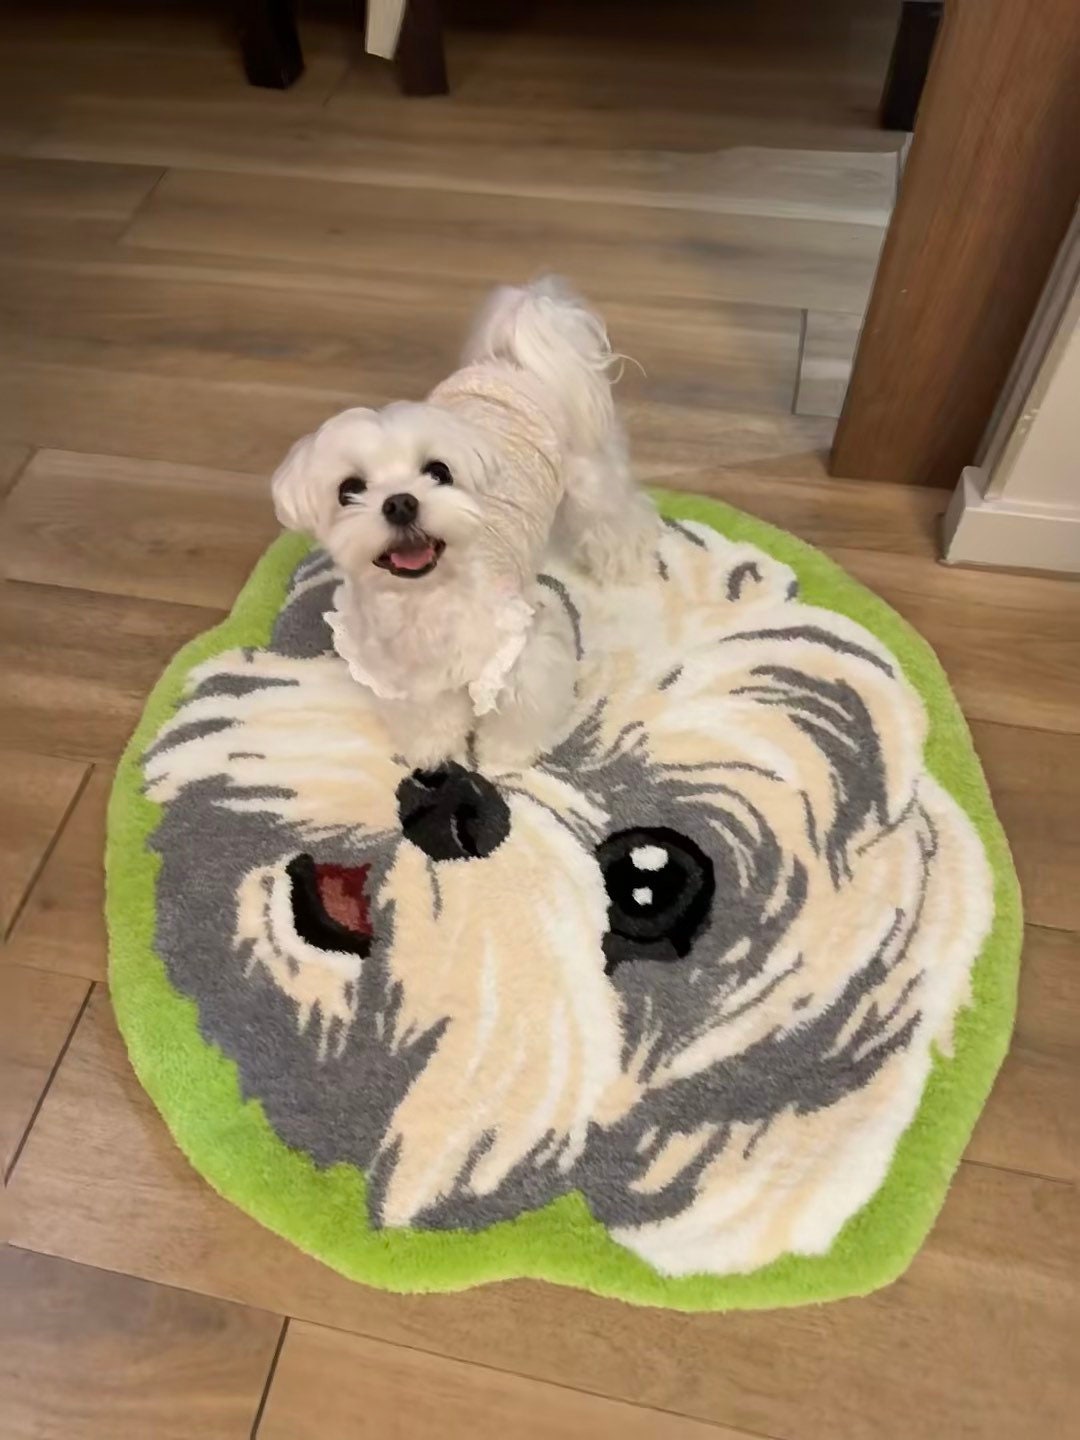 Paw Shaped Rugs - Perfect gifts for pet lovers! Free Shipping.